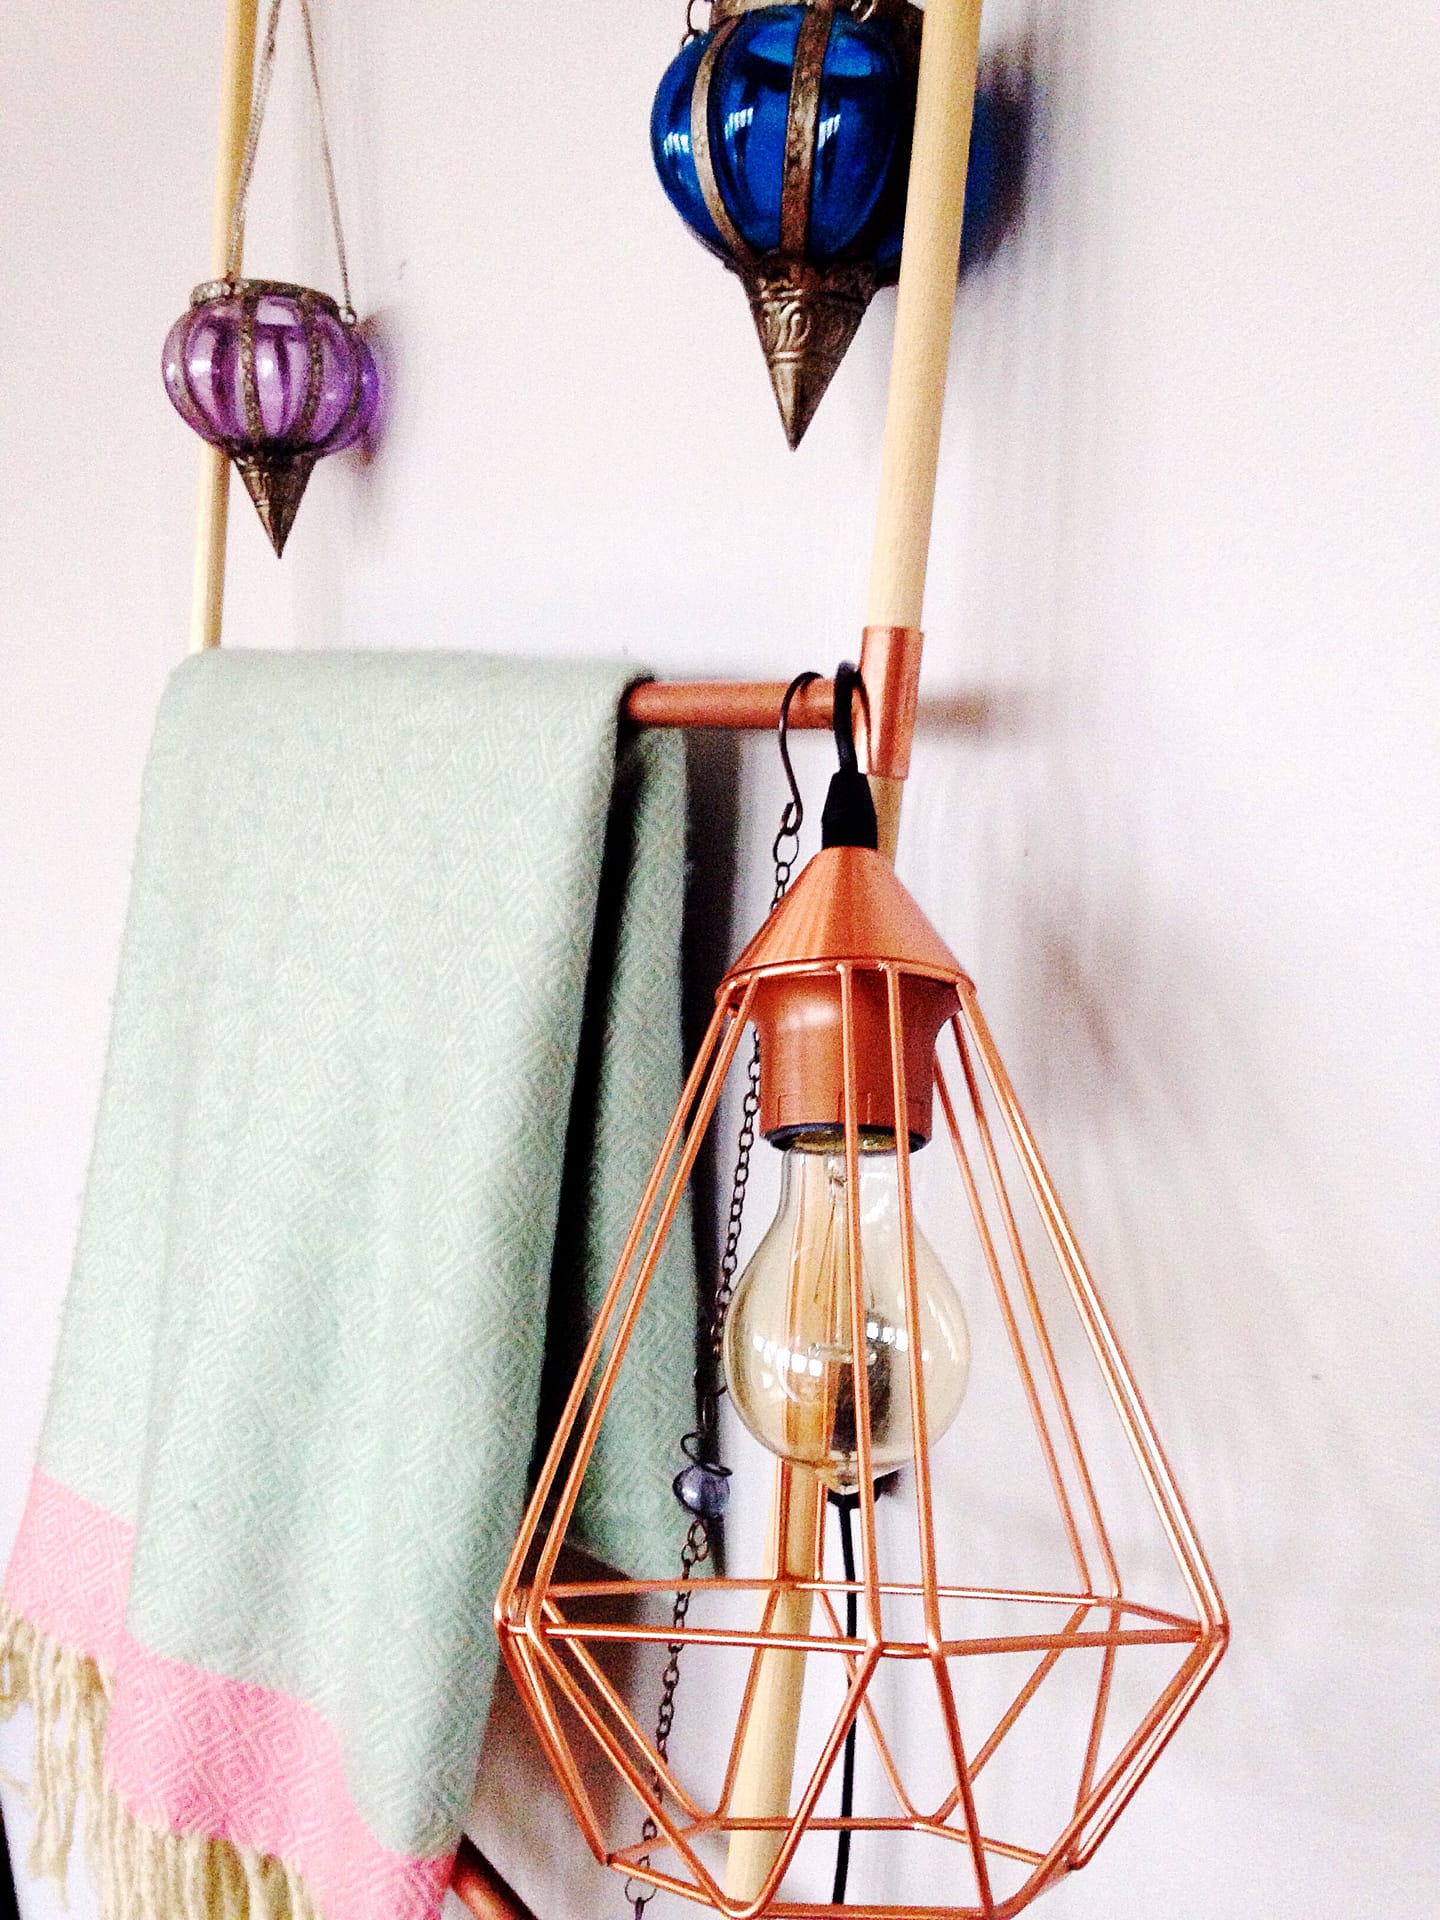 Decorative copper and wood ladder with copper wire hanging lamp